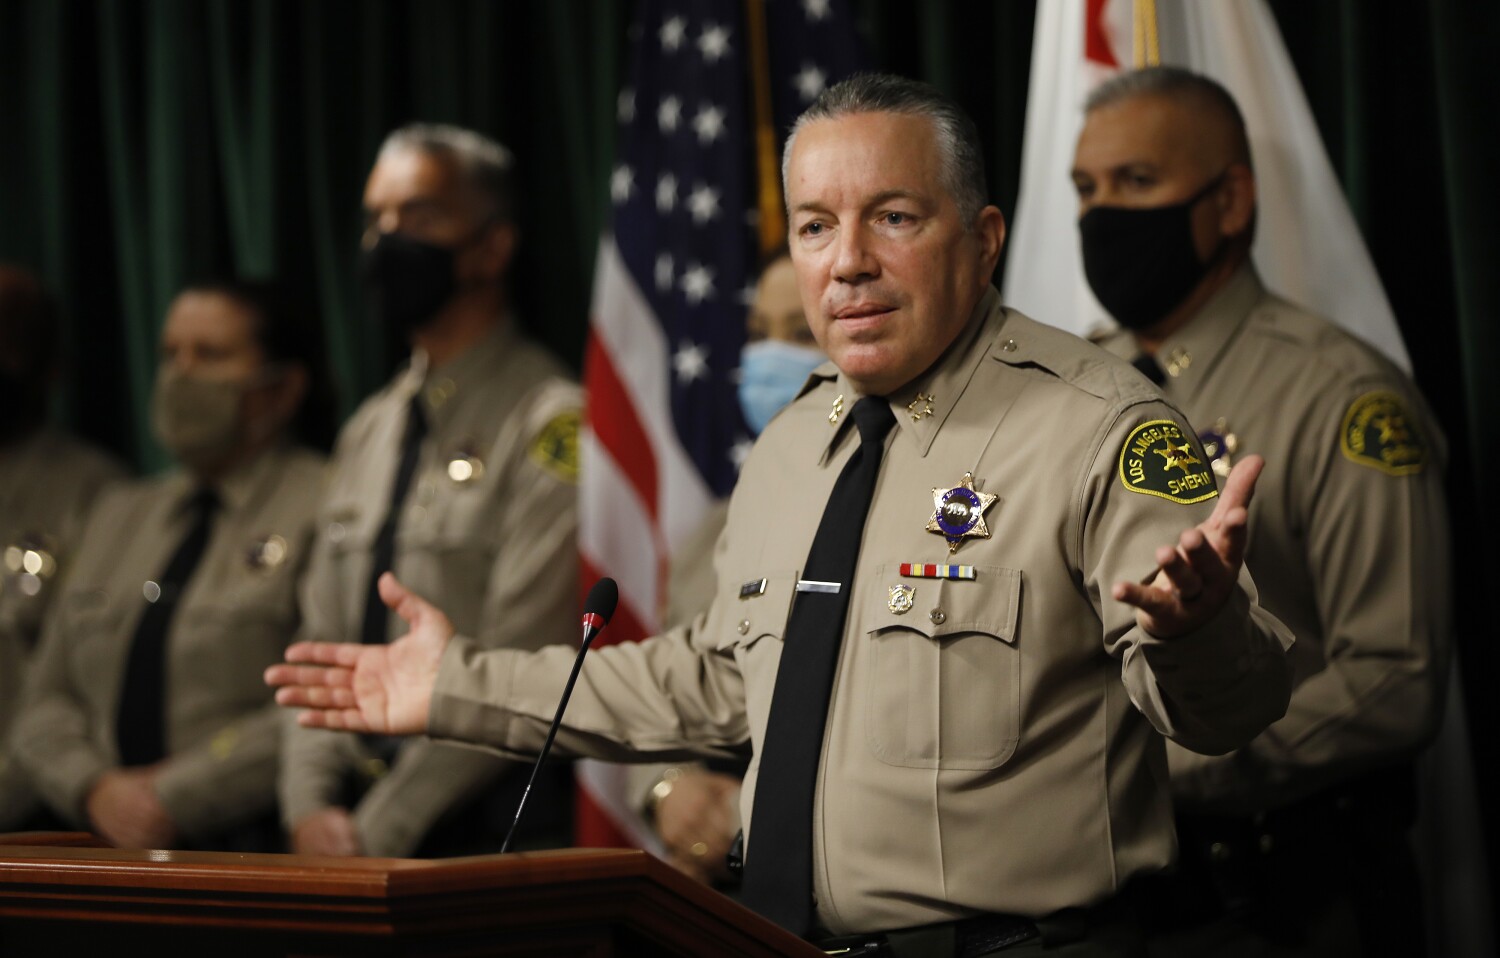 L.A. County sheriff has legal power to ban gang-like groups of deputies, county lawyers say